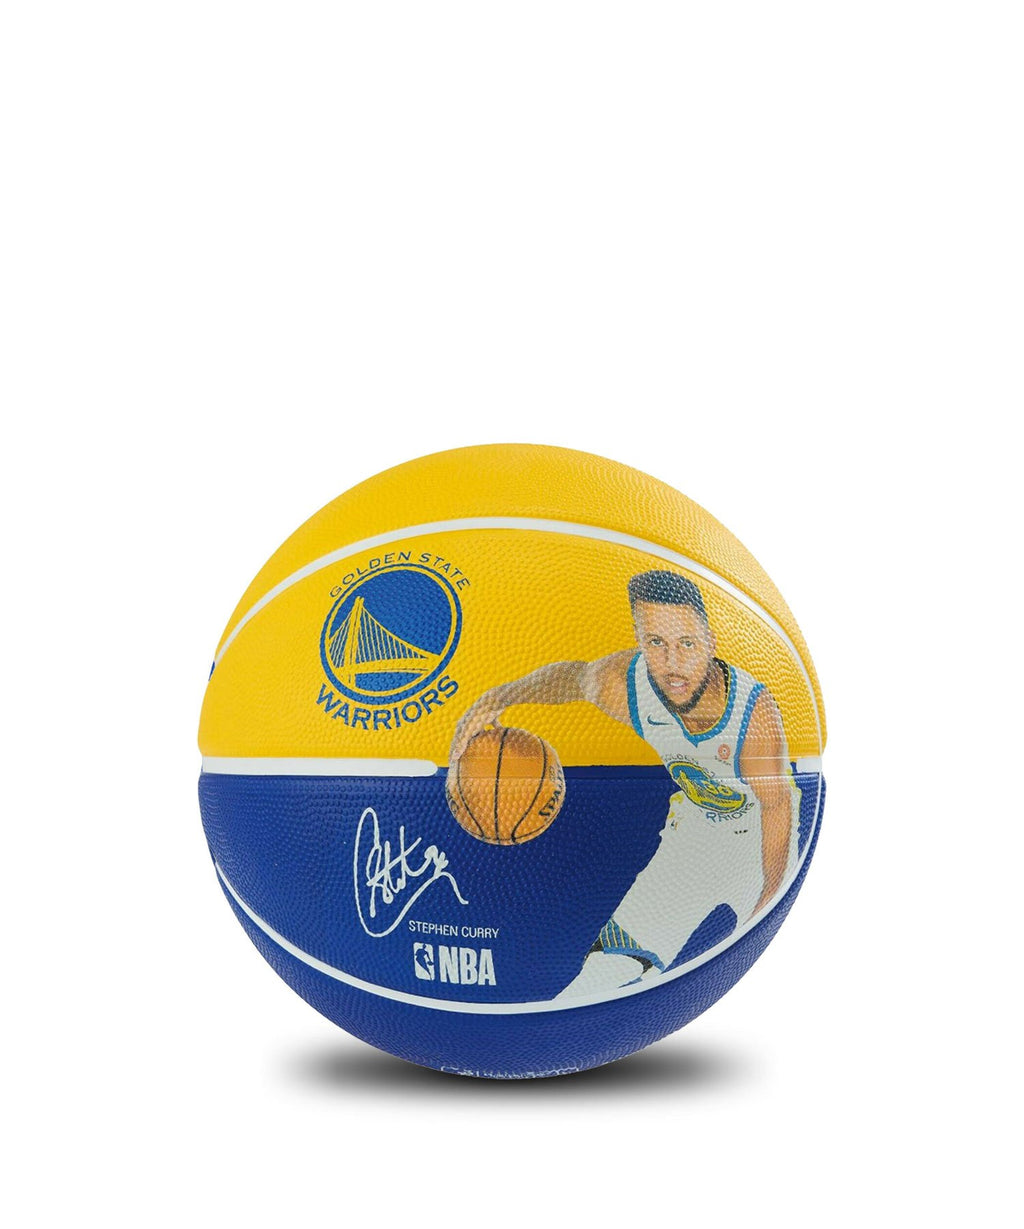 NBA Player 2019 #30 Stephen Curry (Outdoor)